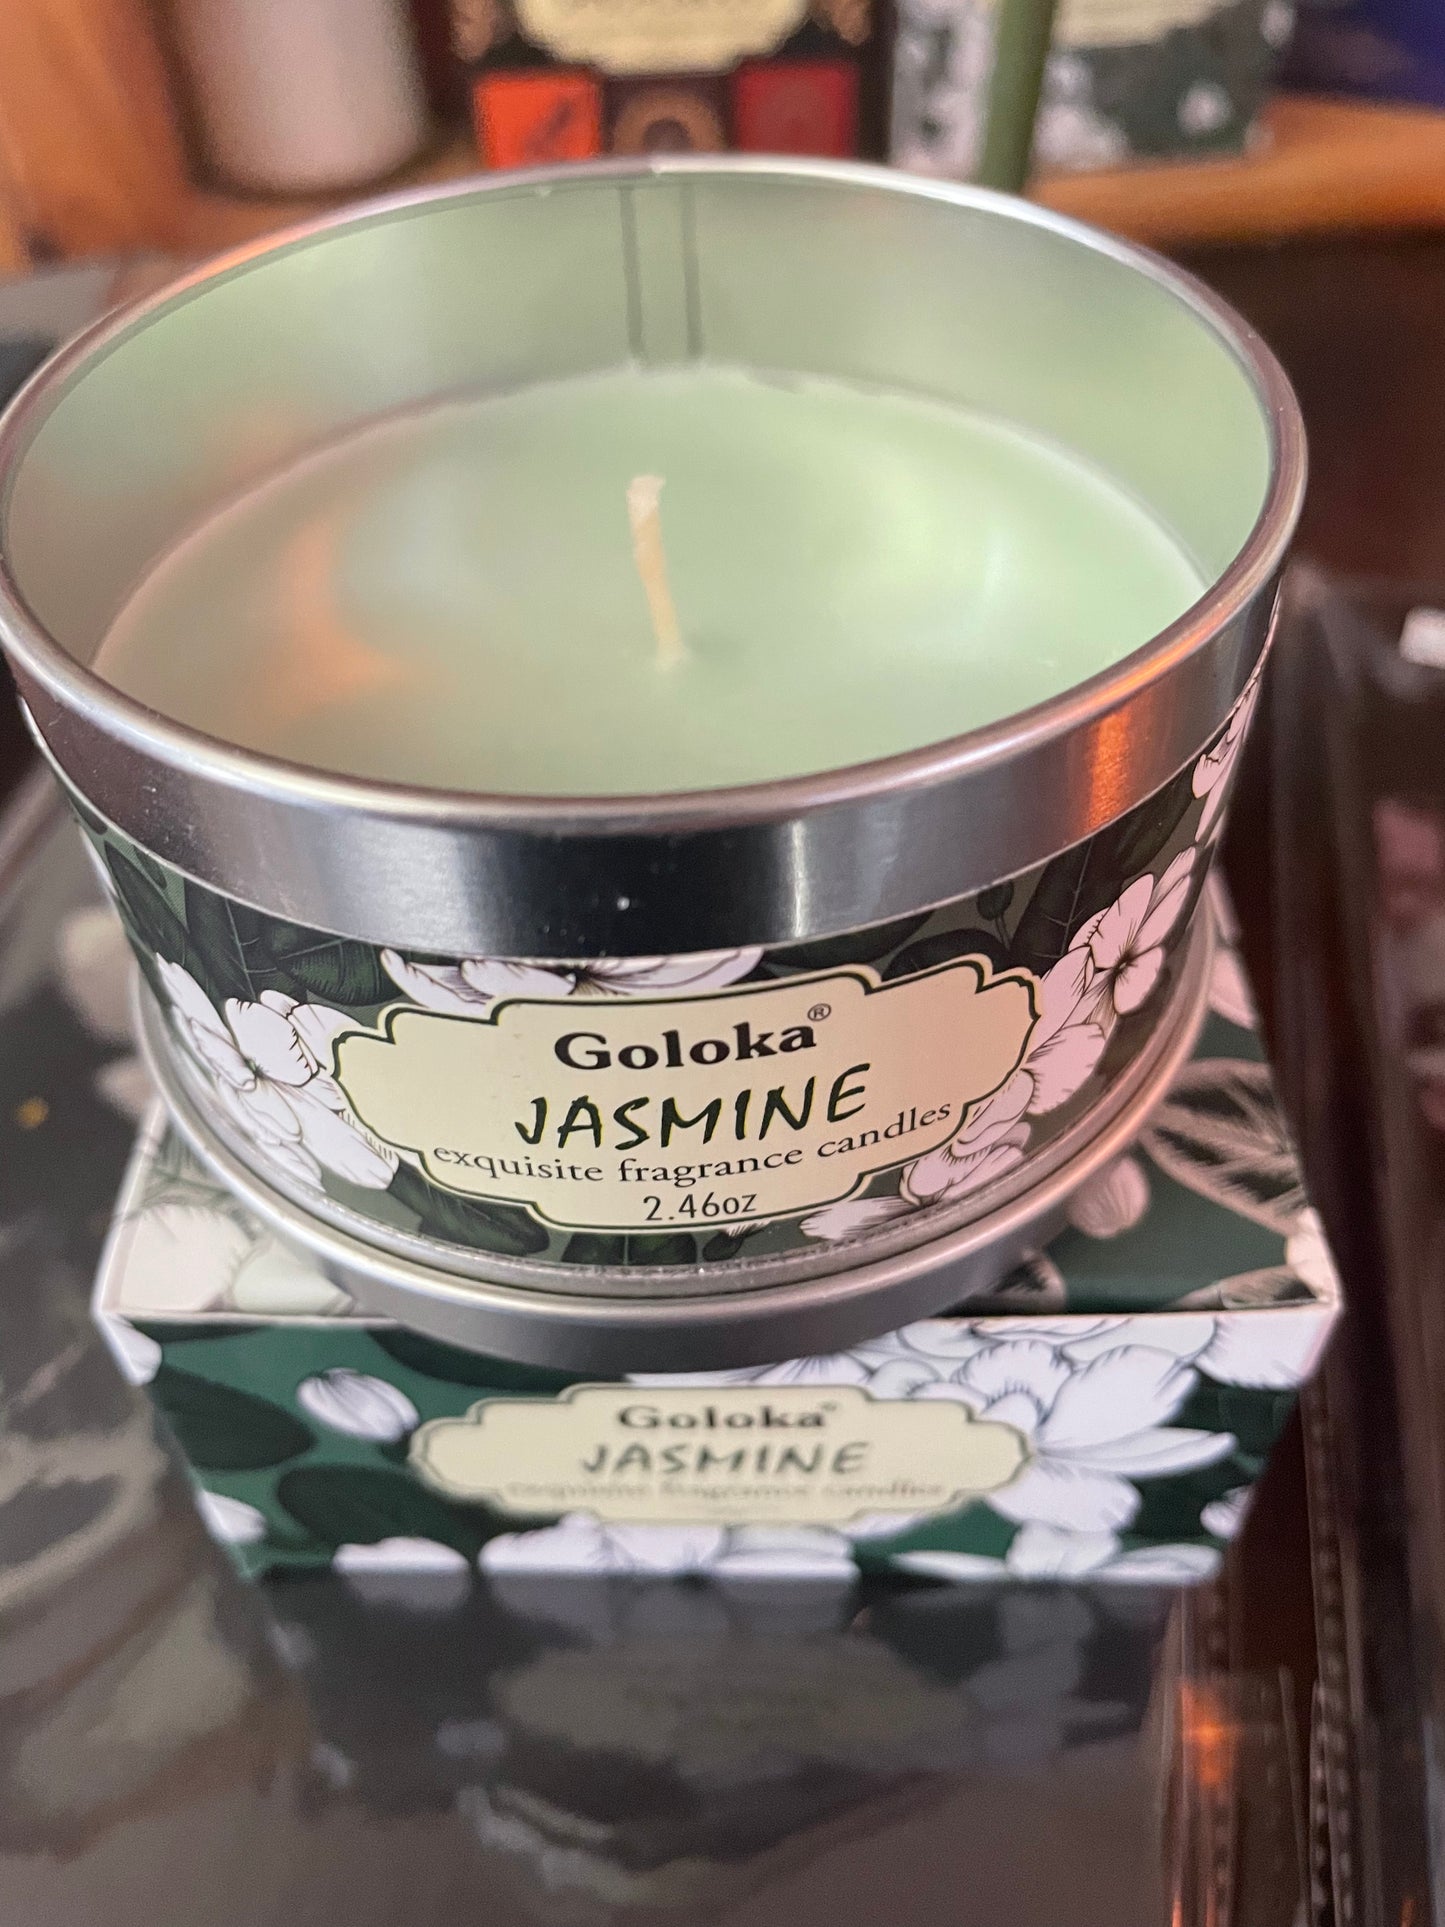 Jasmine scented candle.